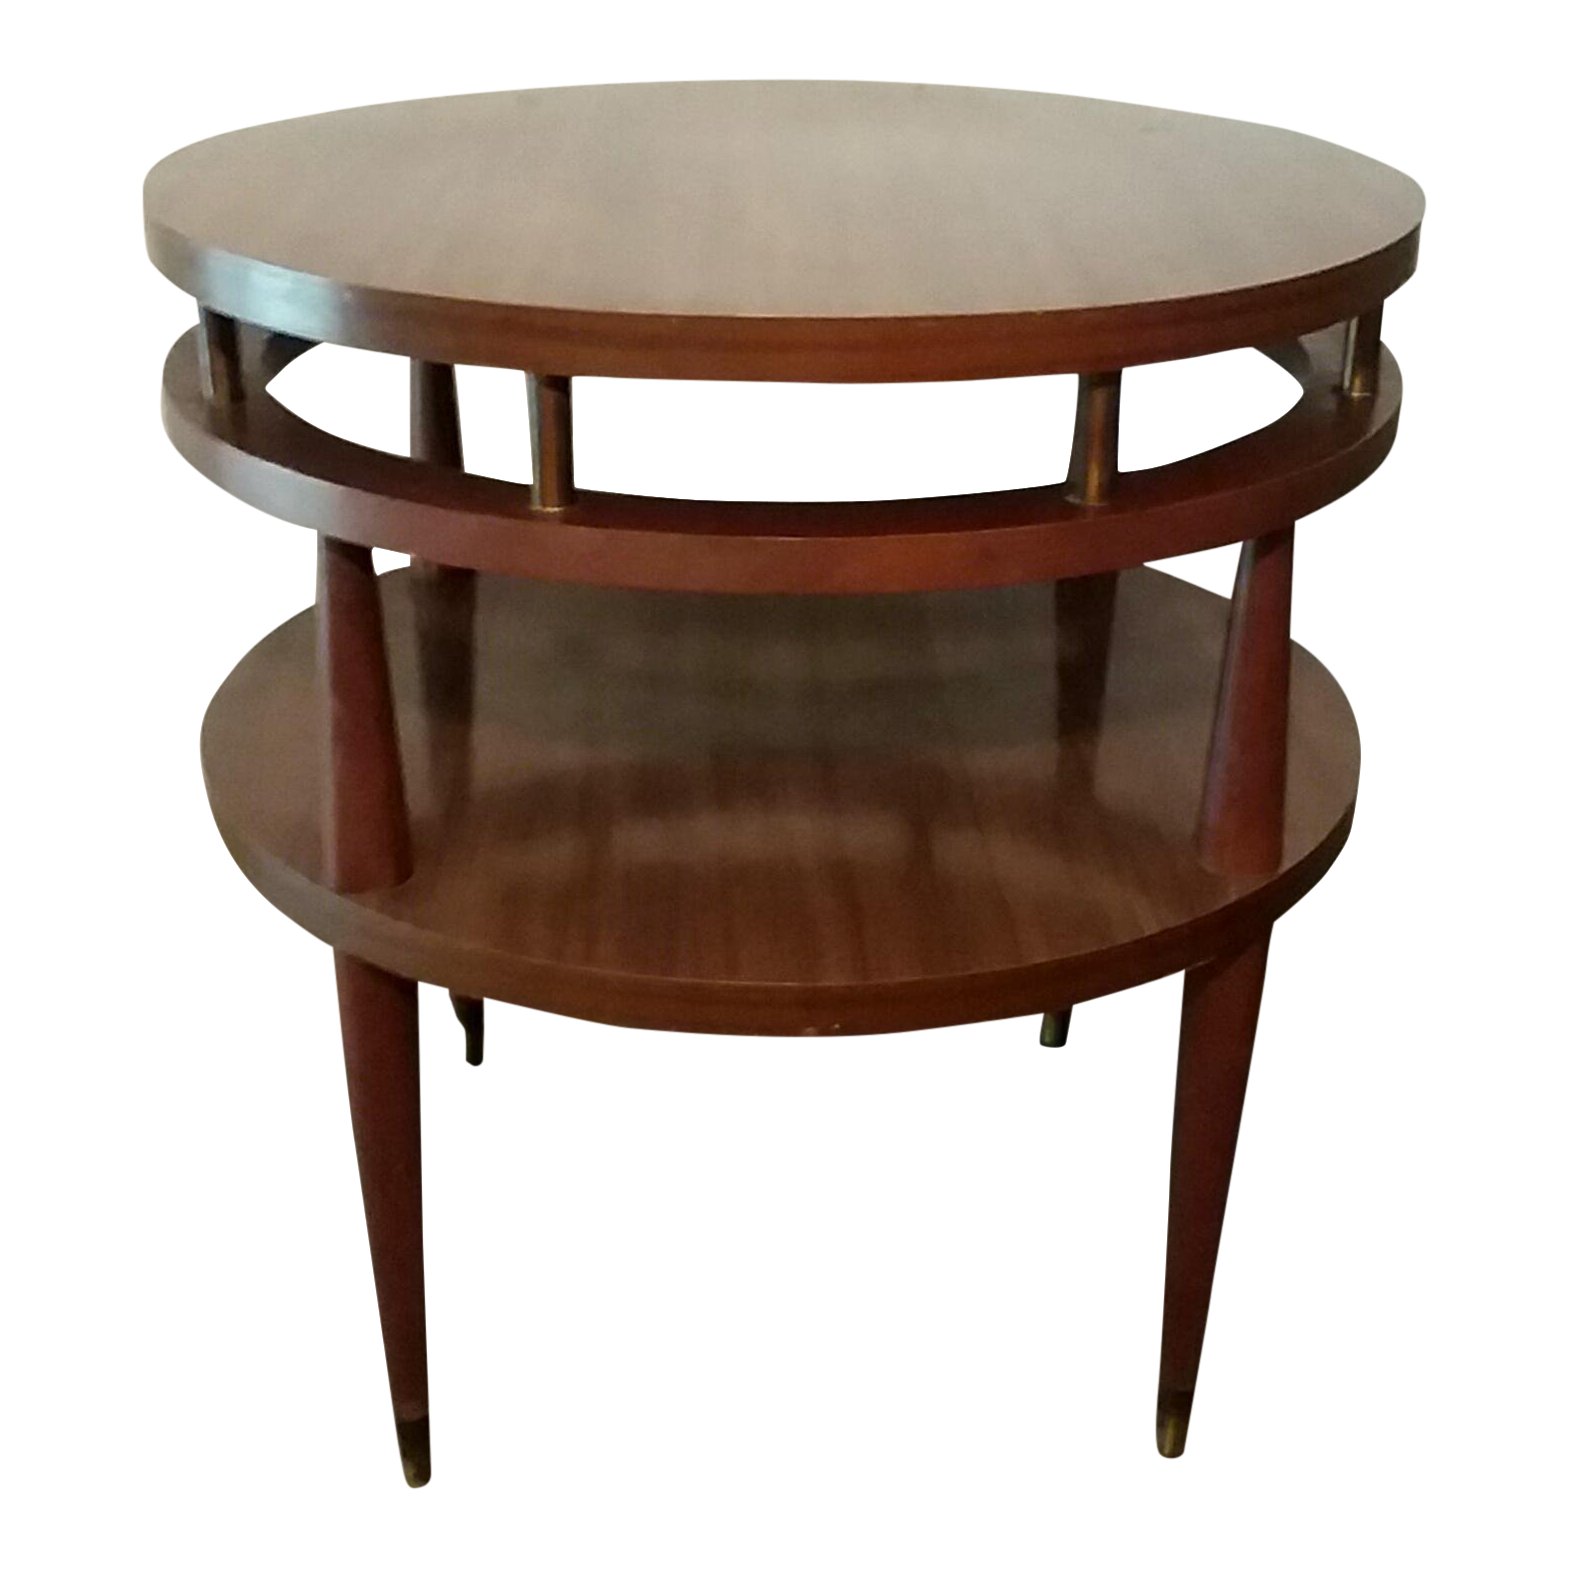 mid century modern round accent table chairish mirror side ikea dorm furniture hammered metal drum end pagoda garden wicker sets hobby lobby patio vintage coffee long narrow